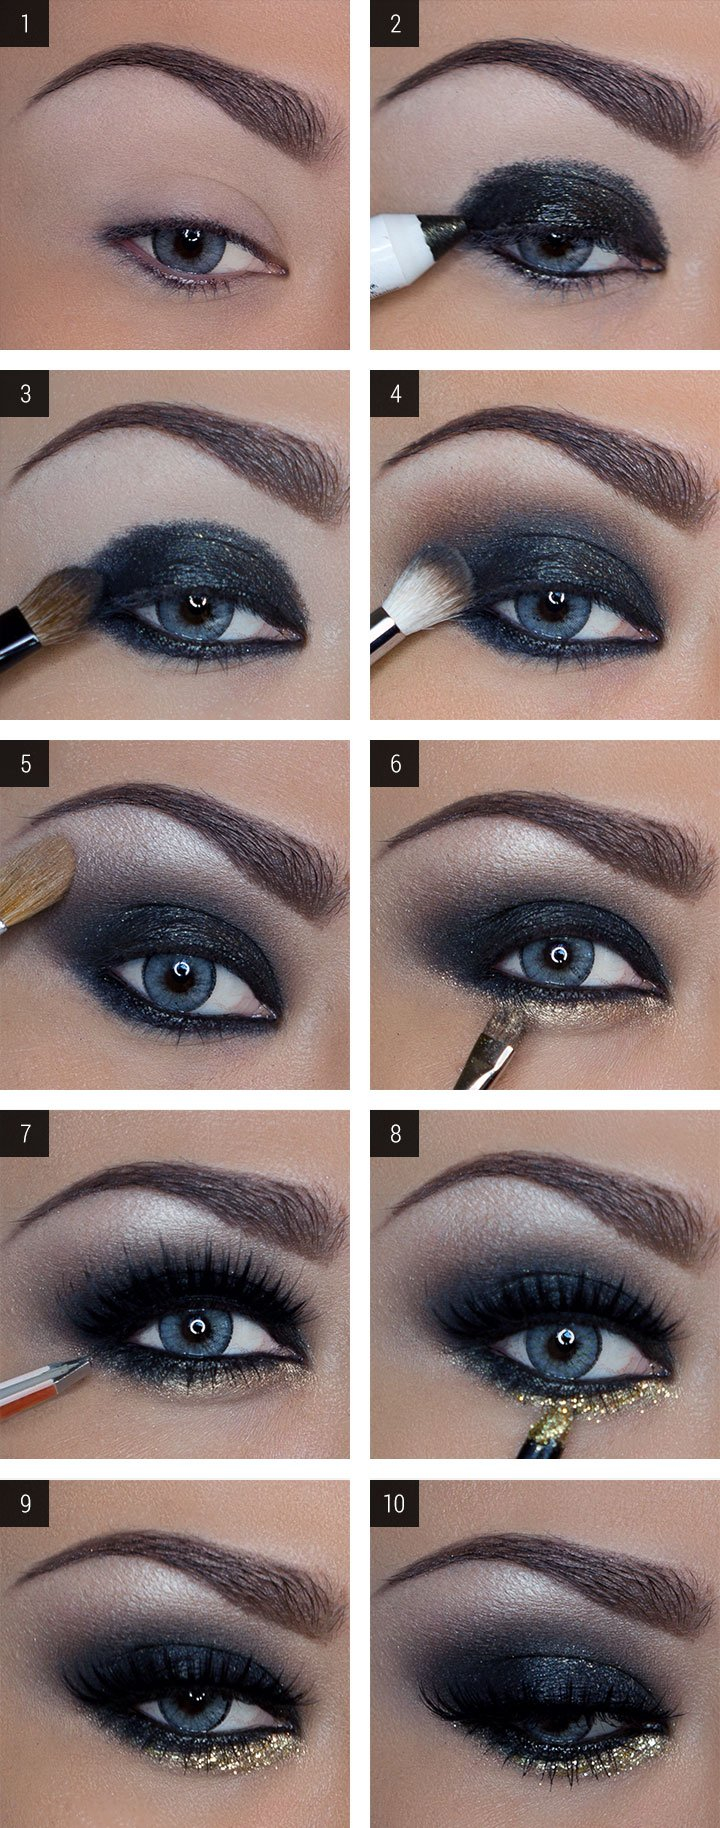 How To Apply Eye Makeup Like A Pro 15 Smokey Eye Tutorials Step Step Guide To Perfect Hollywood Makeup